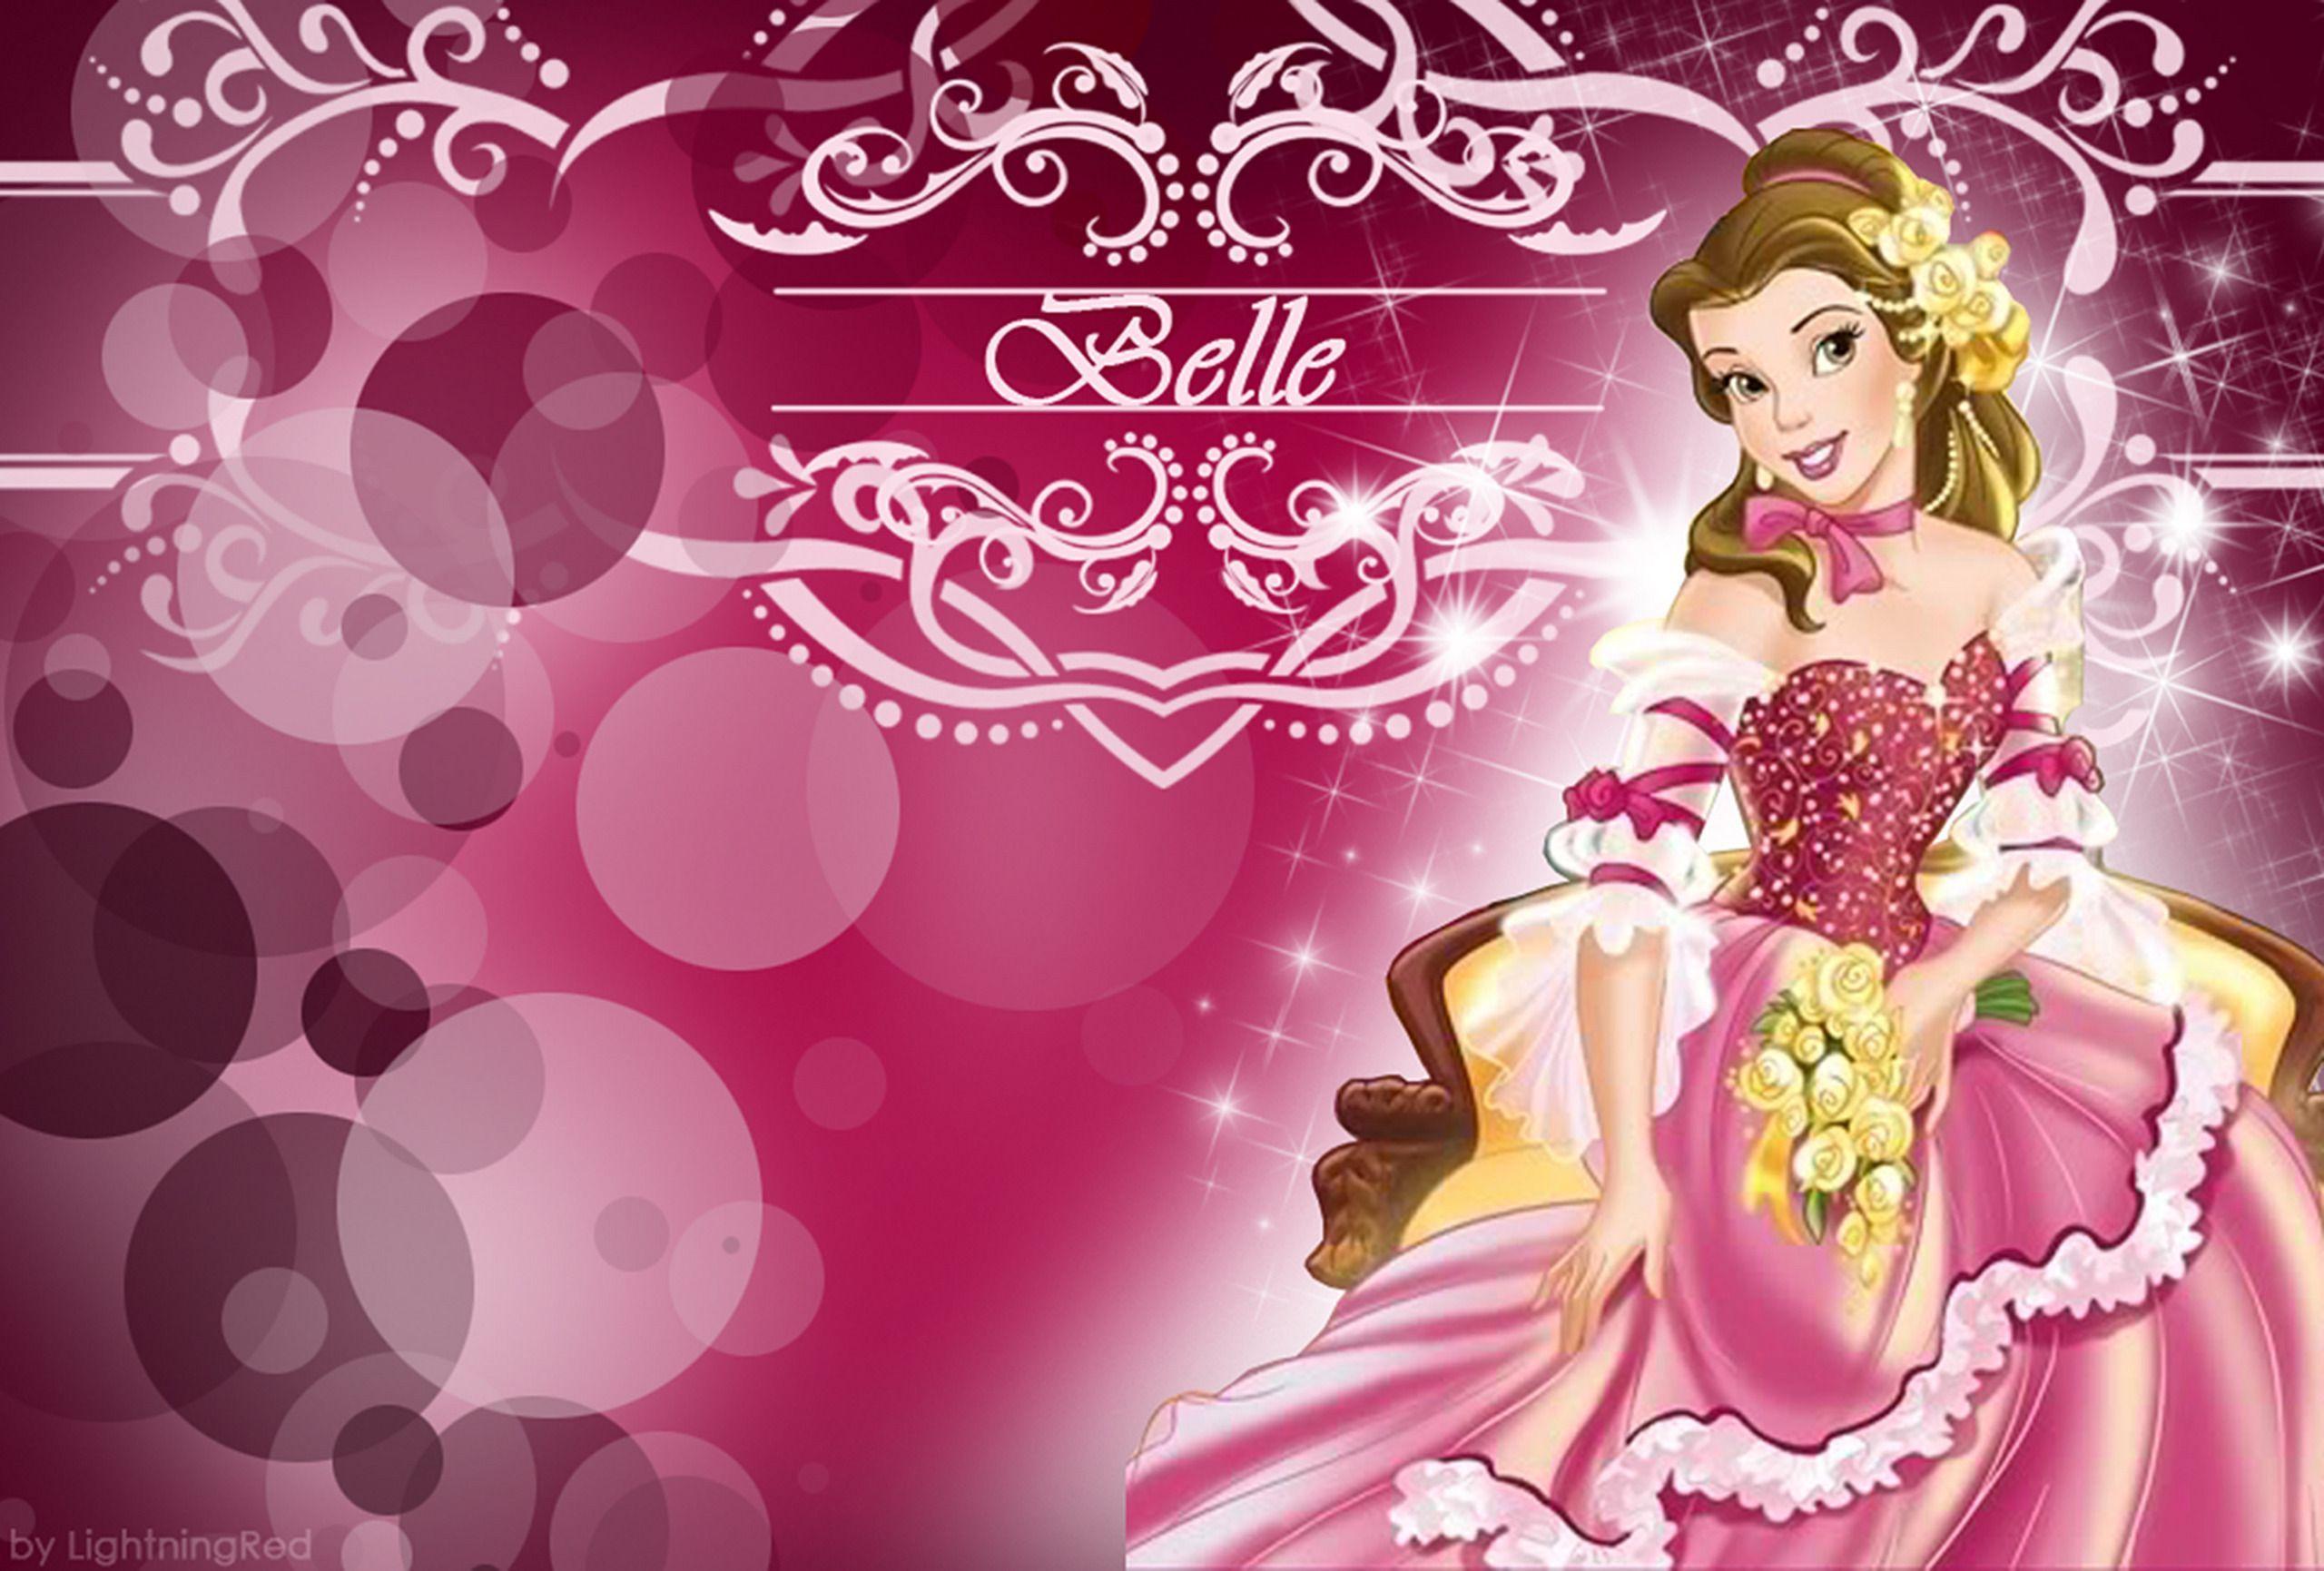 Princess Background Images HD Pictures and Wallpaper For Free Download   Pngtree